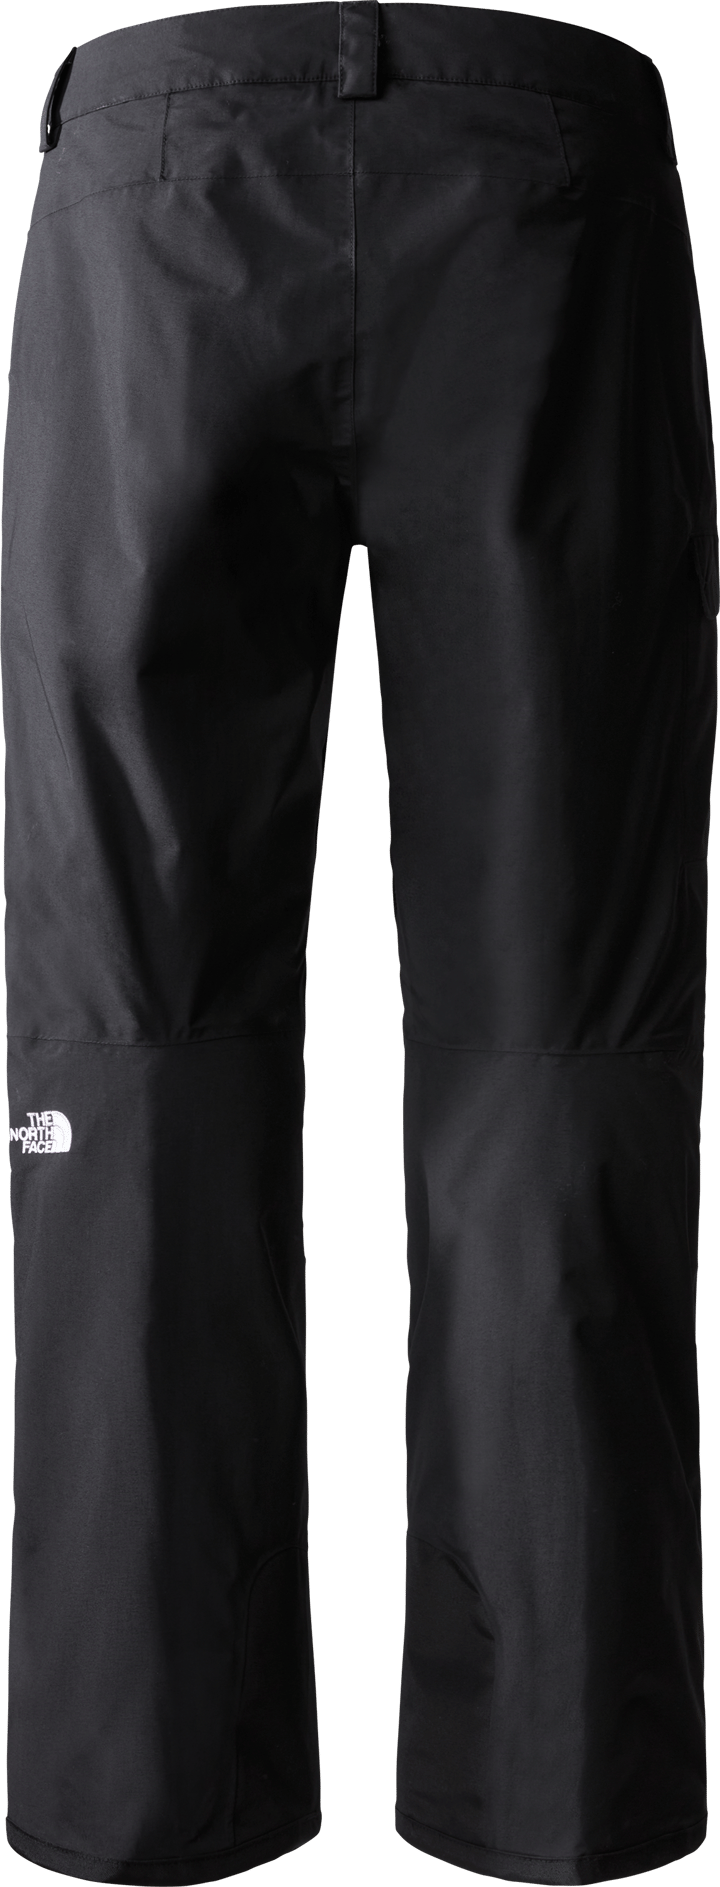 Men's Freedom Insulated Pant Tnf Black The North Face